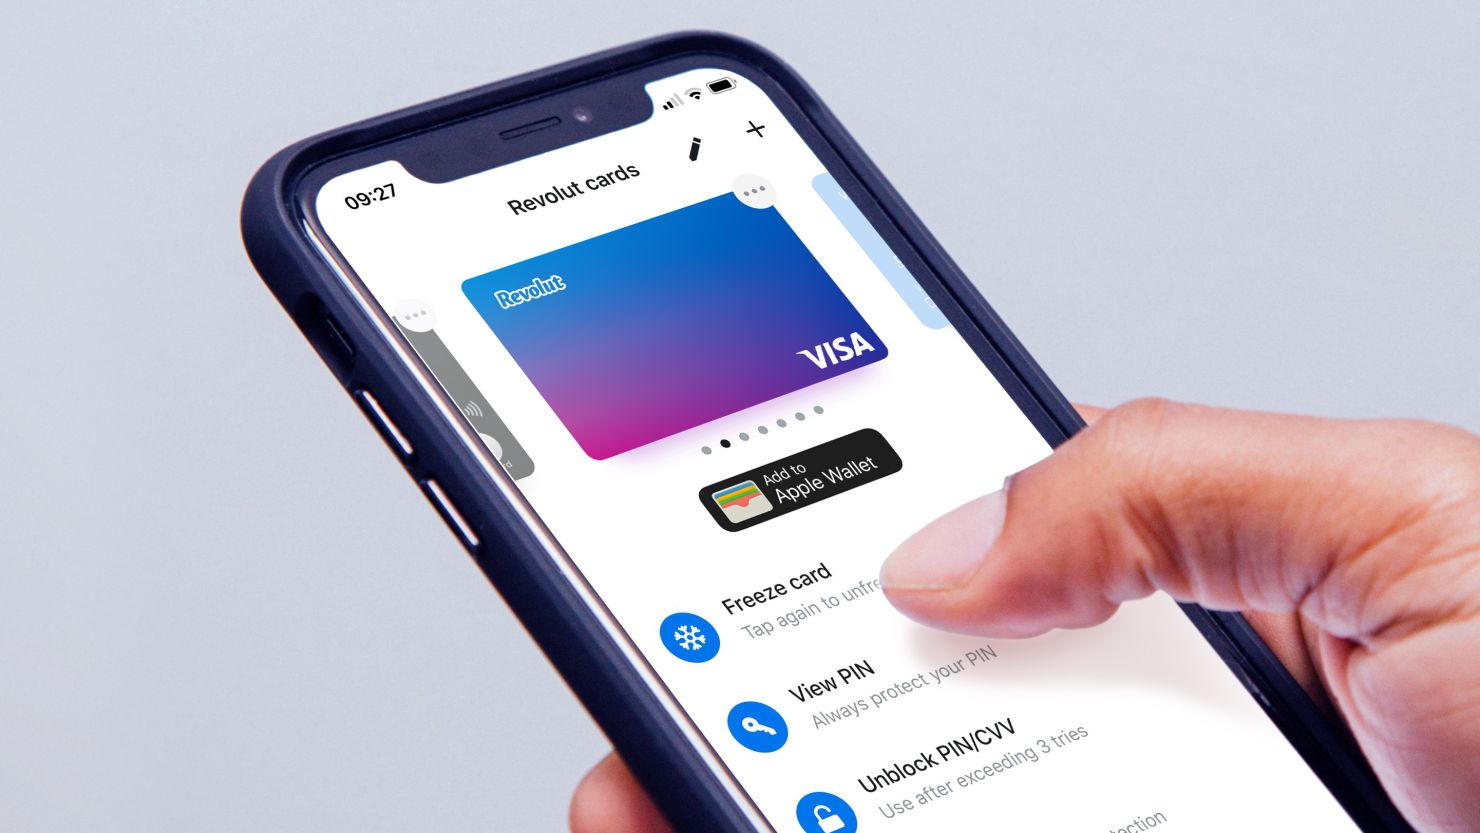 The digital bank Revolut is now targeting Gen Z with its app and card for kids.